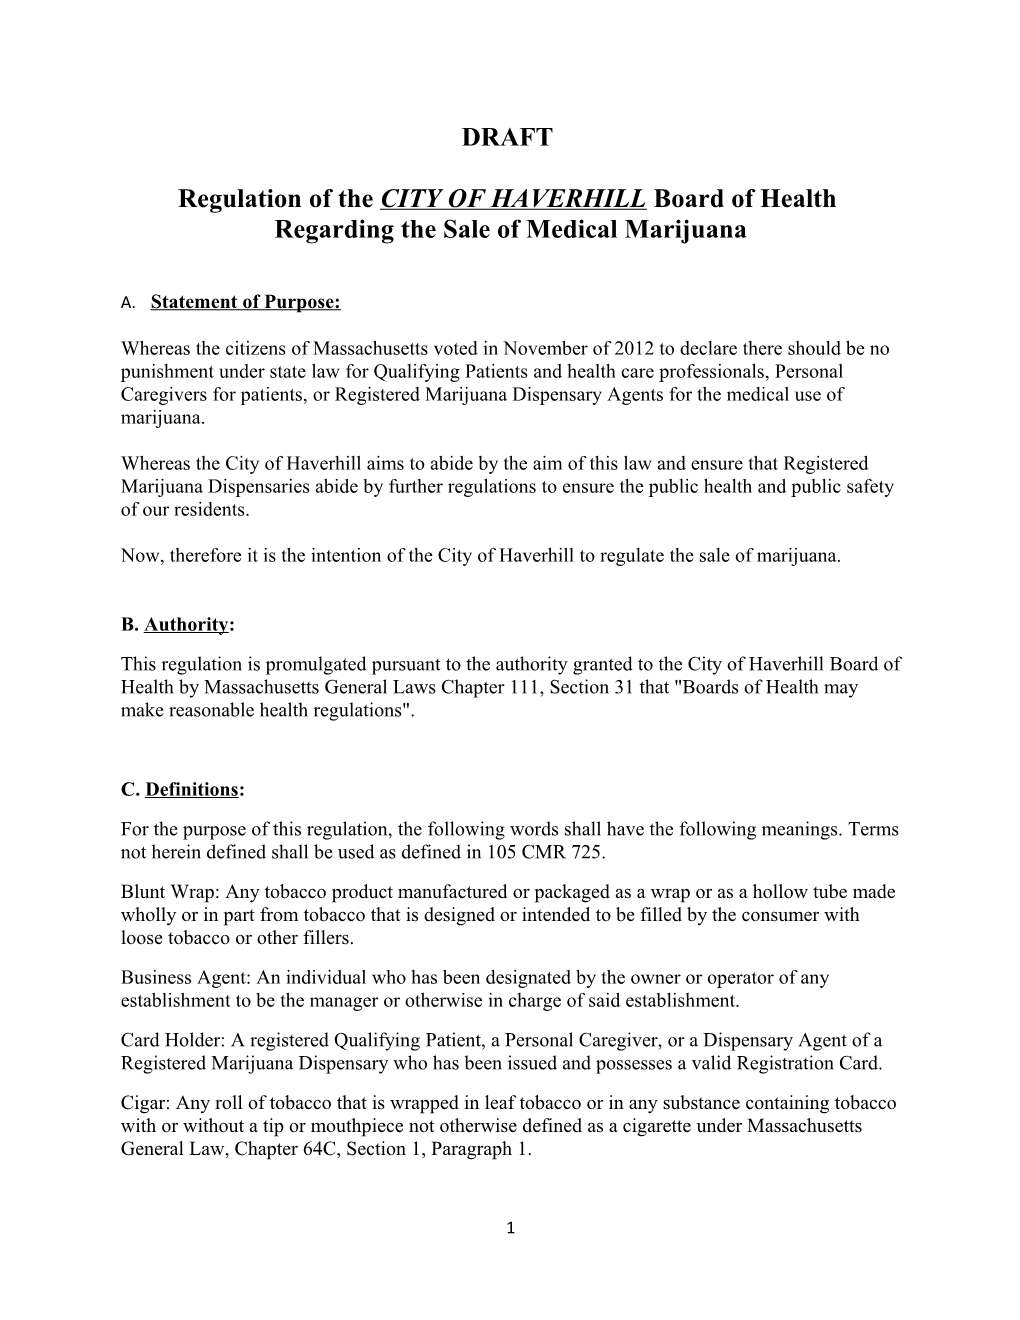 Regulation of Thecity of HAVERHILL Board of Health